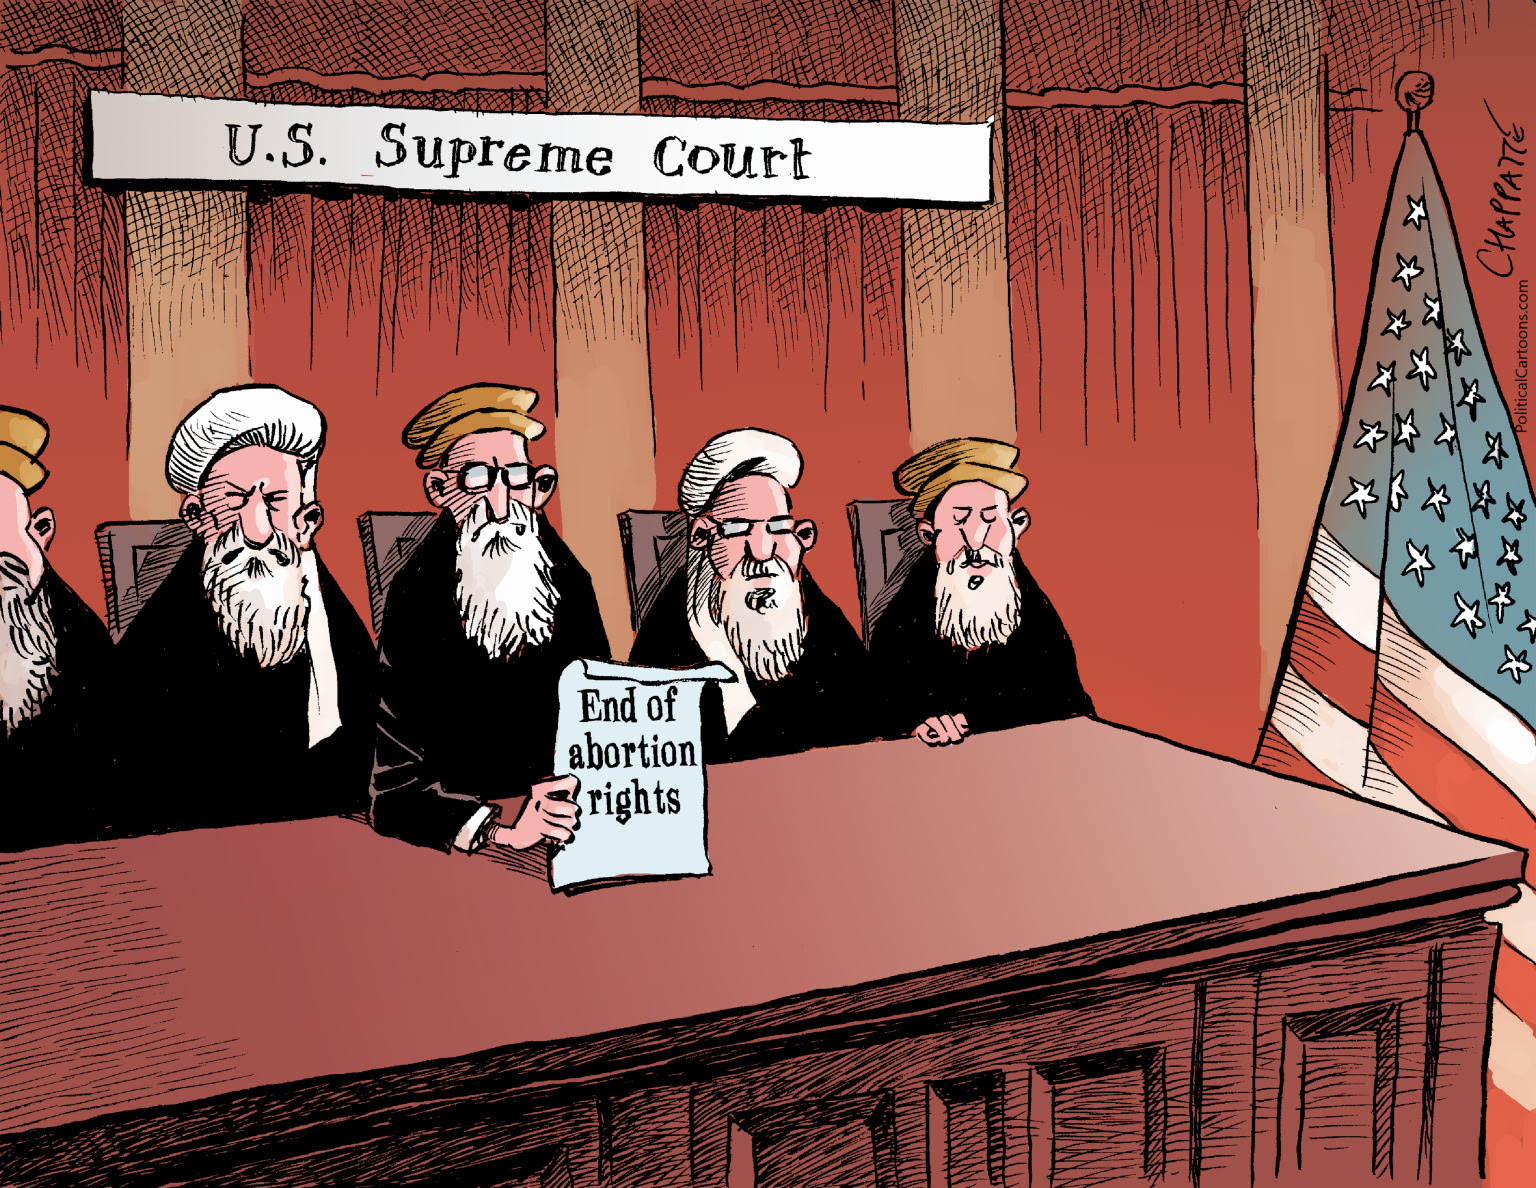 Republicans are like American Taliban who have packed the Supreme Court and deny women their rights.